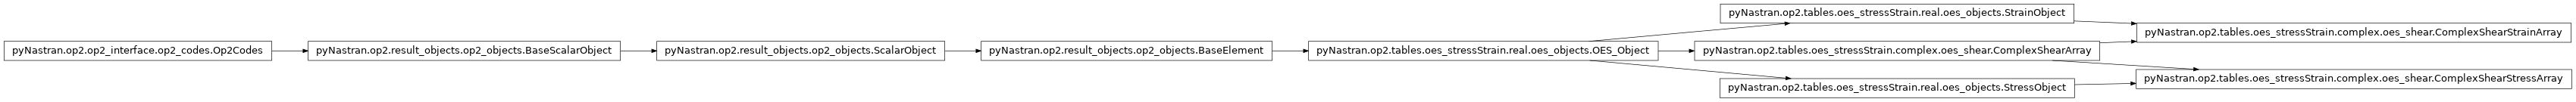 Inheritance diagram of pyNastran.op2.tables.oes_stressStrain.complex.oes_shear